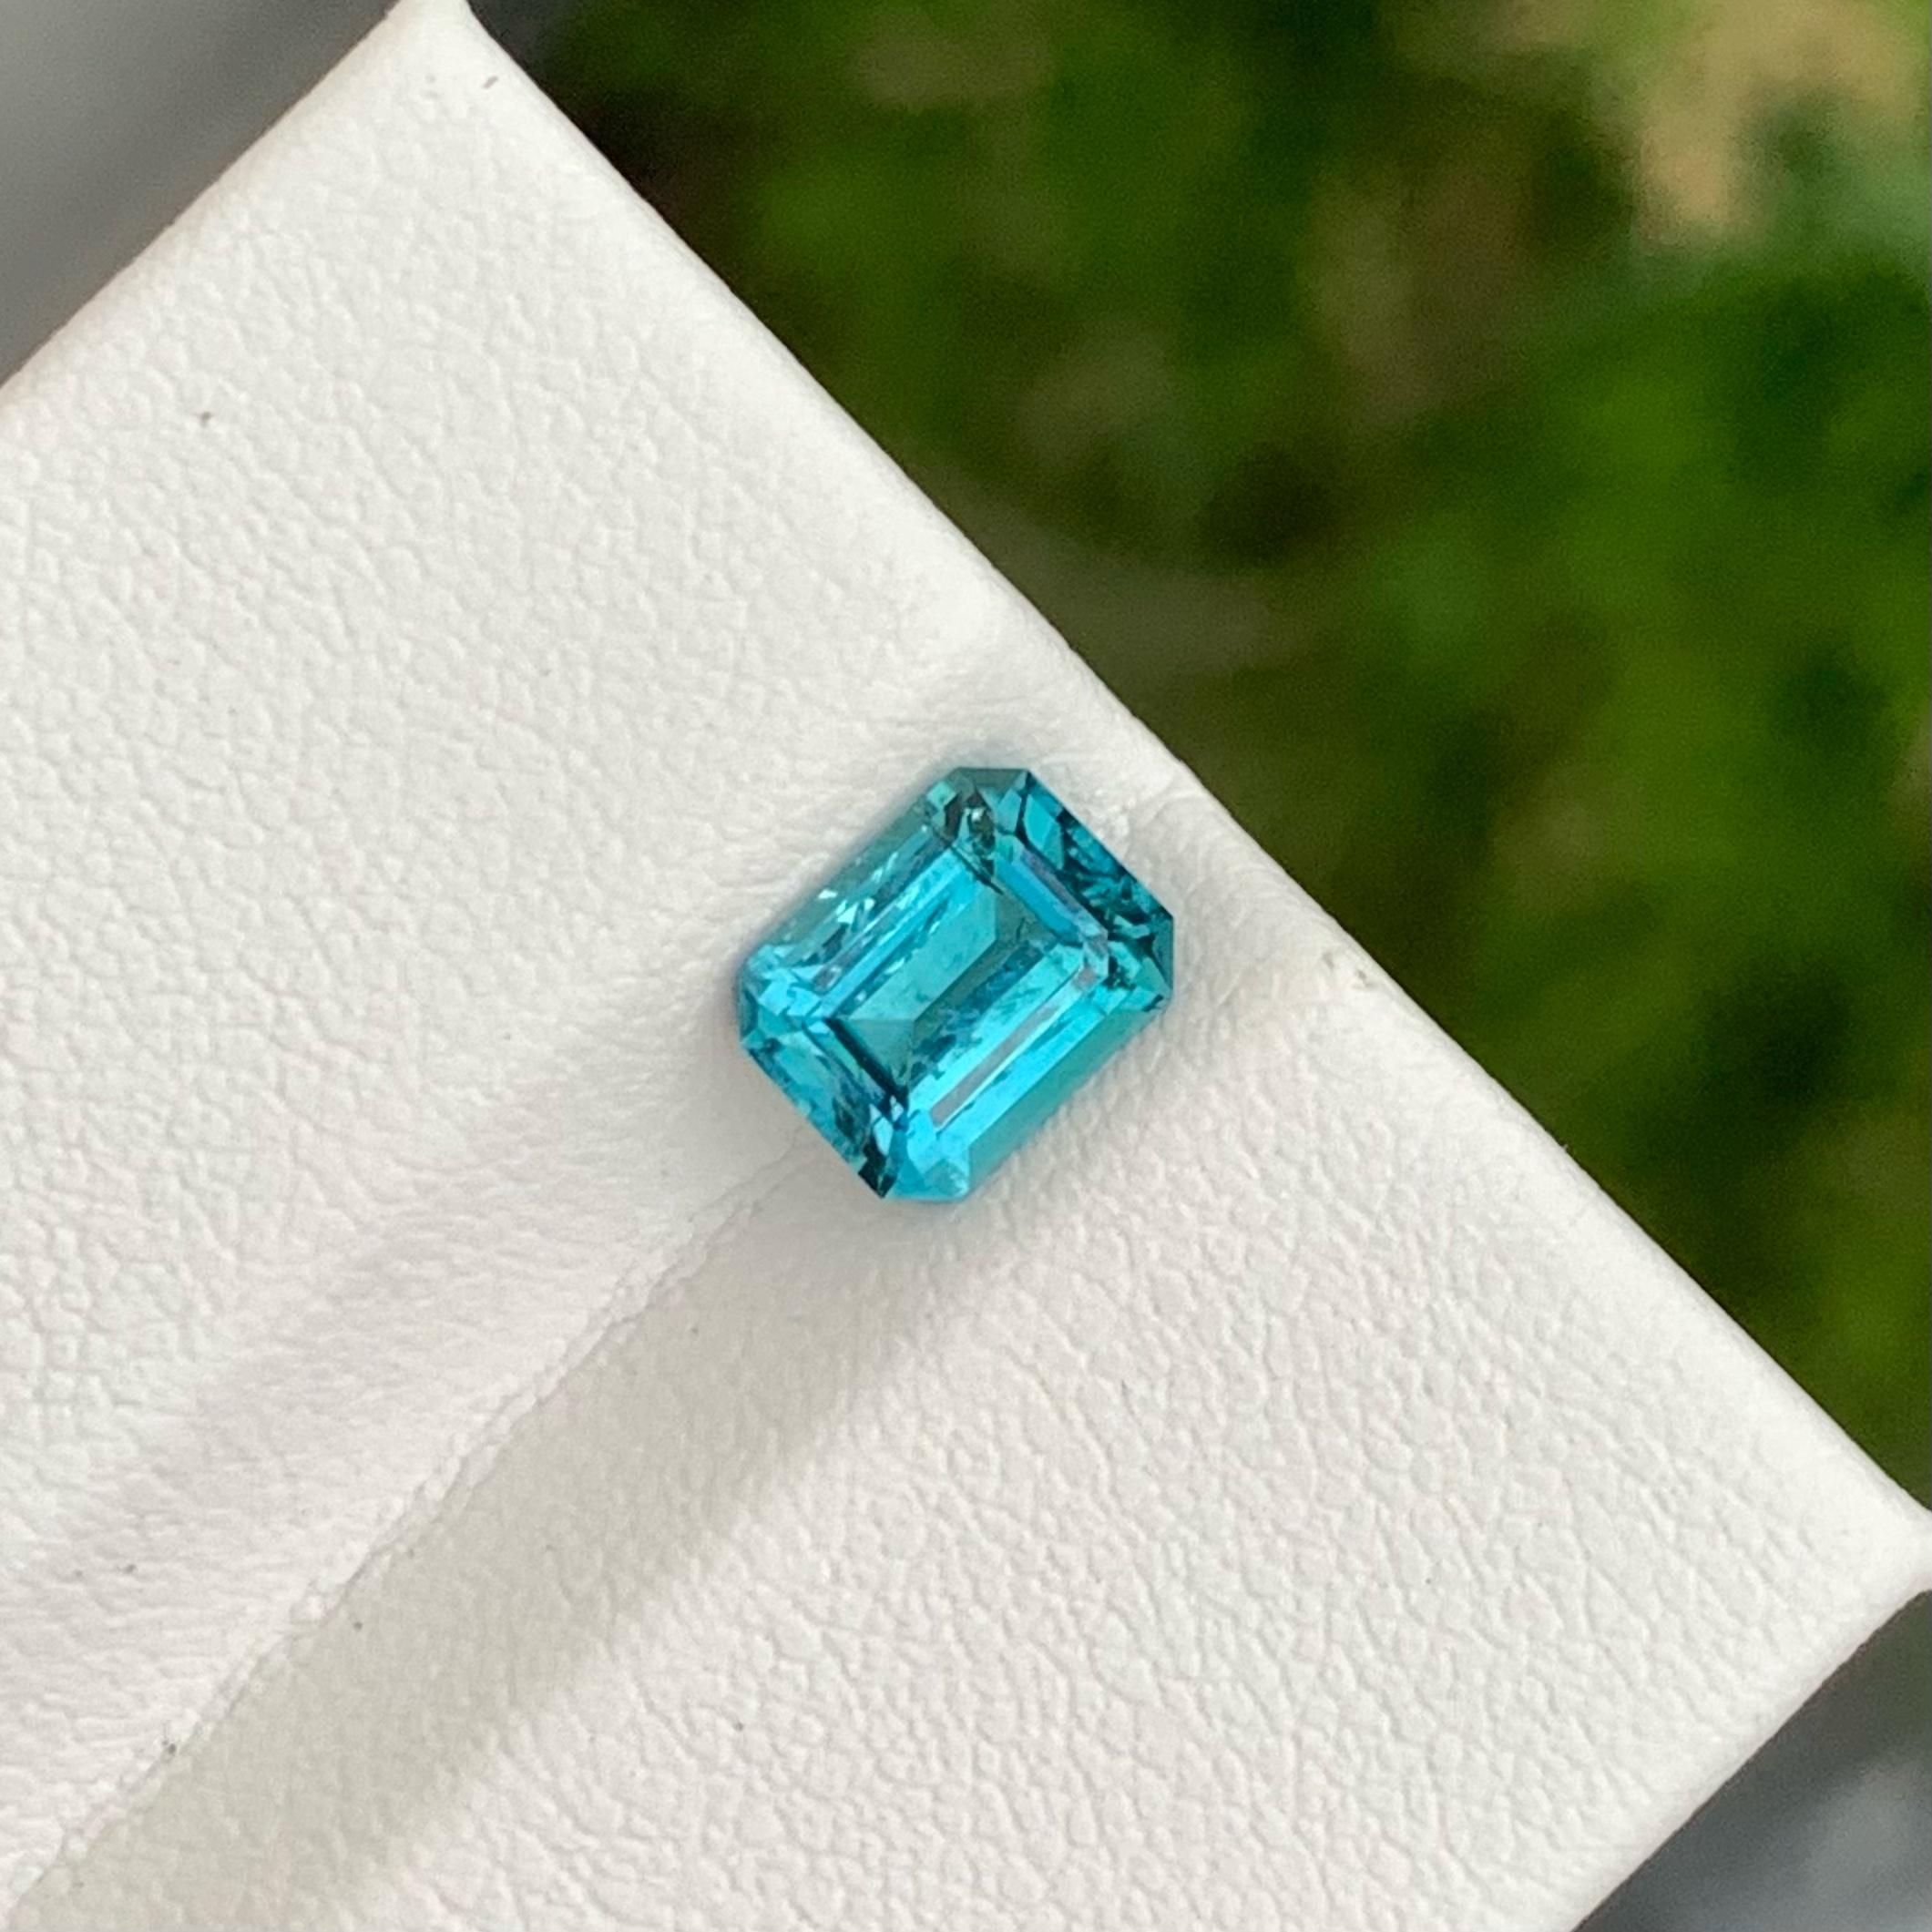 Weight 1.65 carats 
Dimensions 7.8 x 6.1 x 4.4 mm
Treatment None 
Origin Afghanistan 
Clarity SI (Slightly Included)
Shape Octagon 
Cut Emerald 


Tiffany Blue Tourmaline is a stunning gemstone known for its beautiful blue-green color, reminiscent